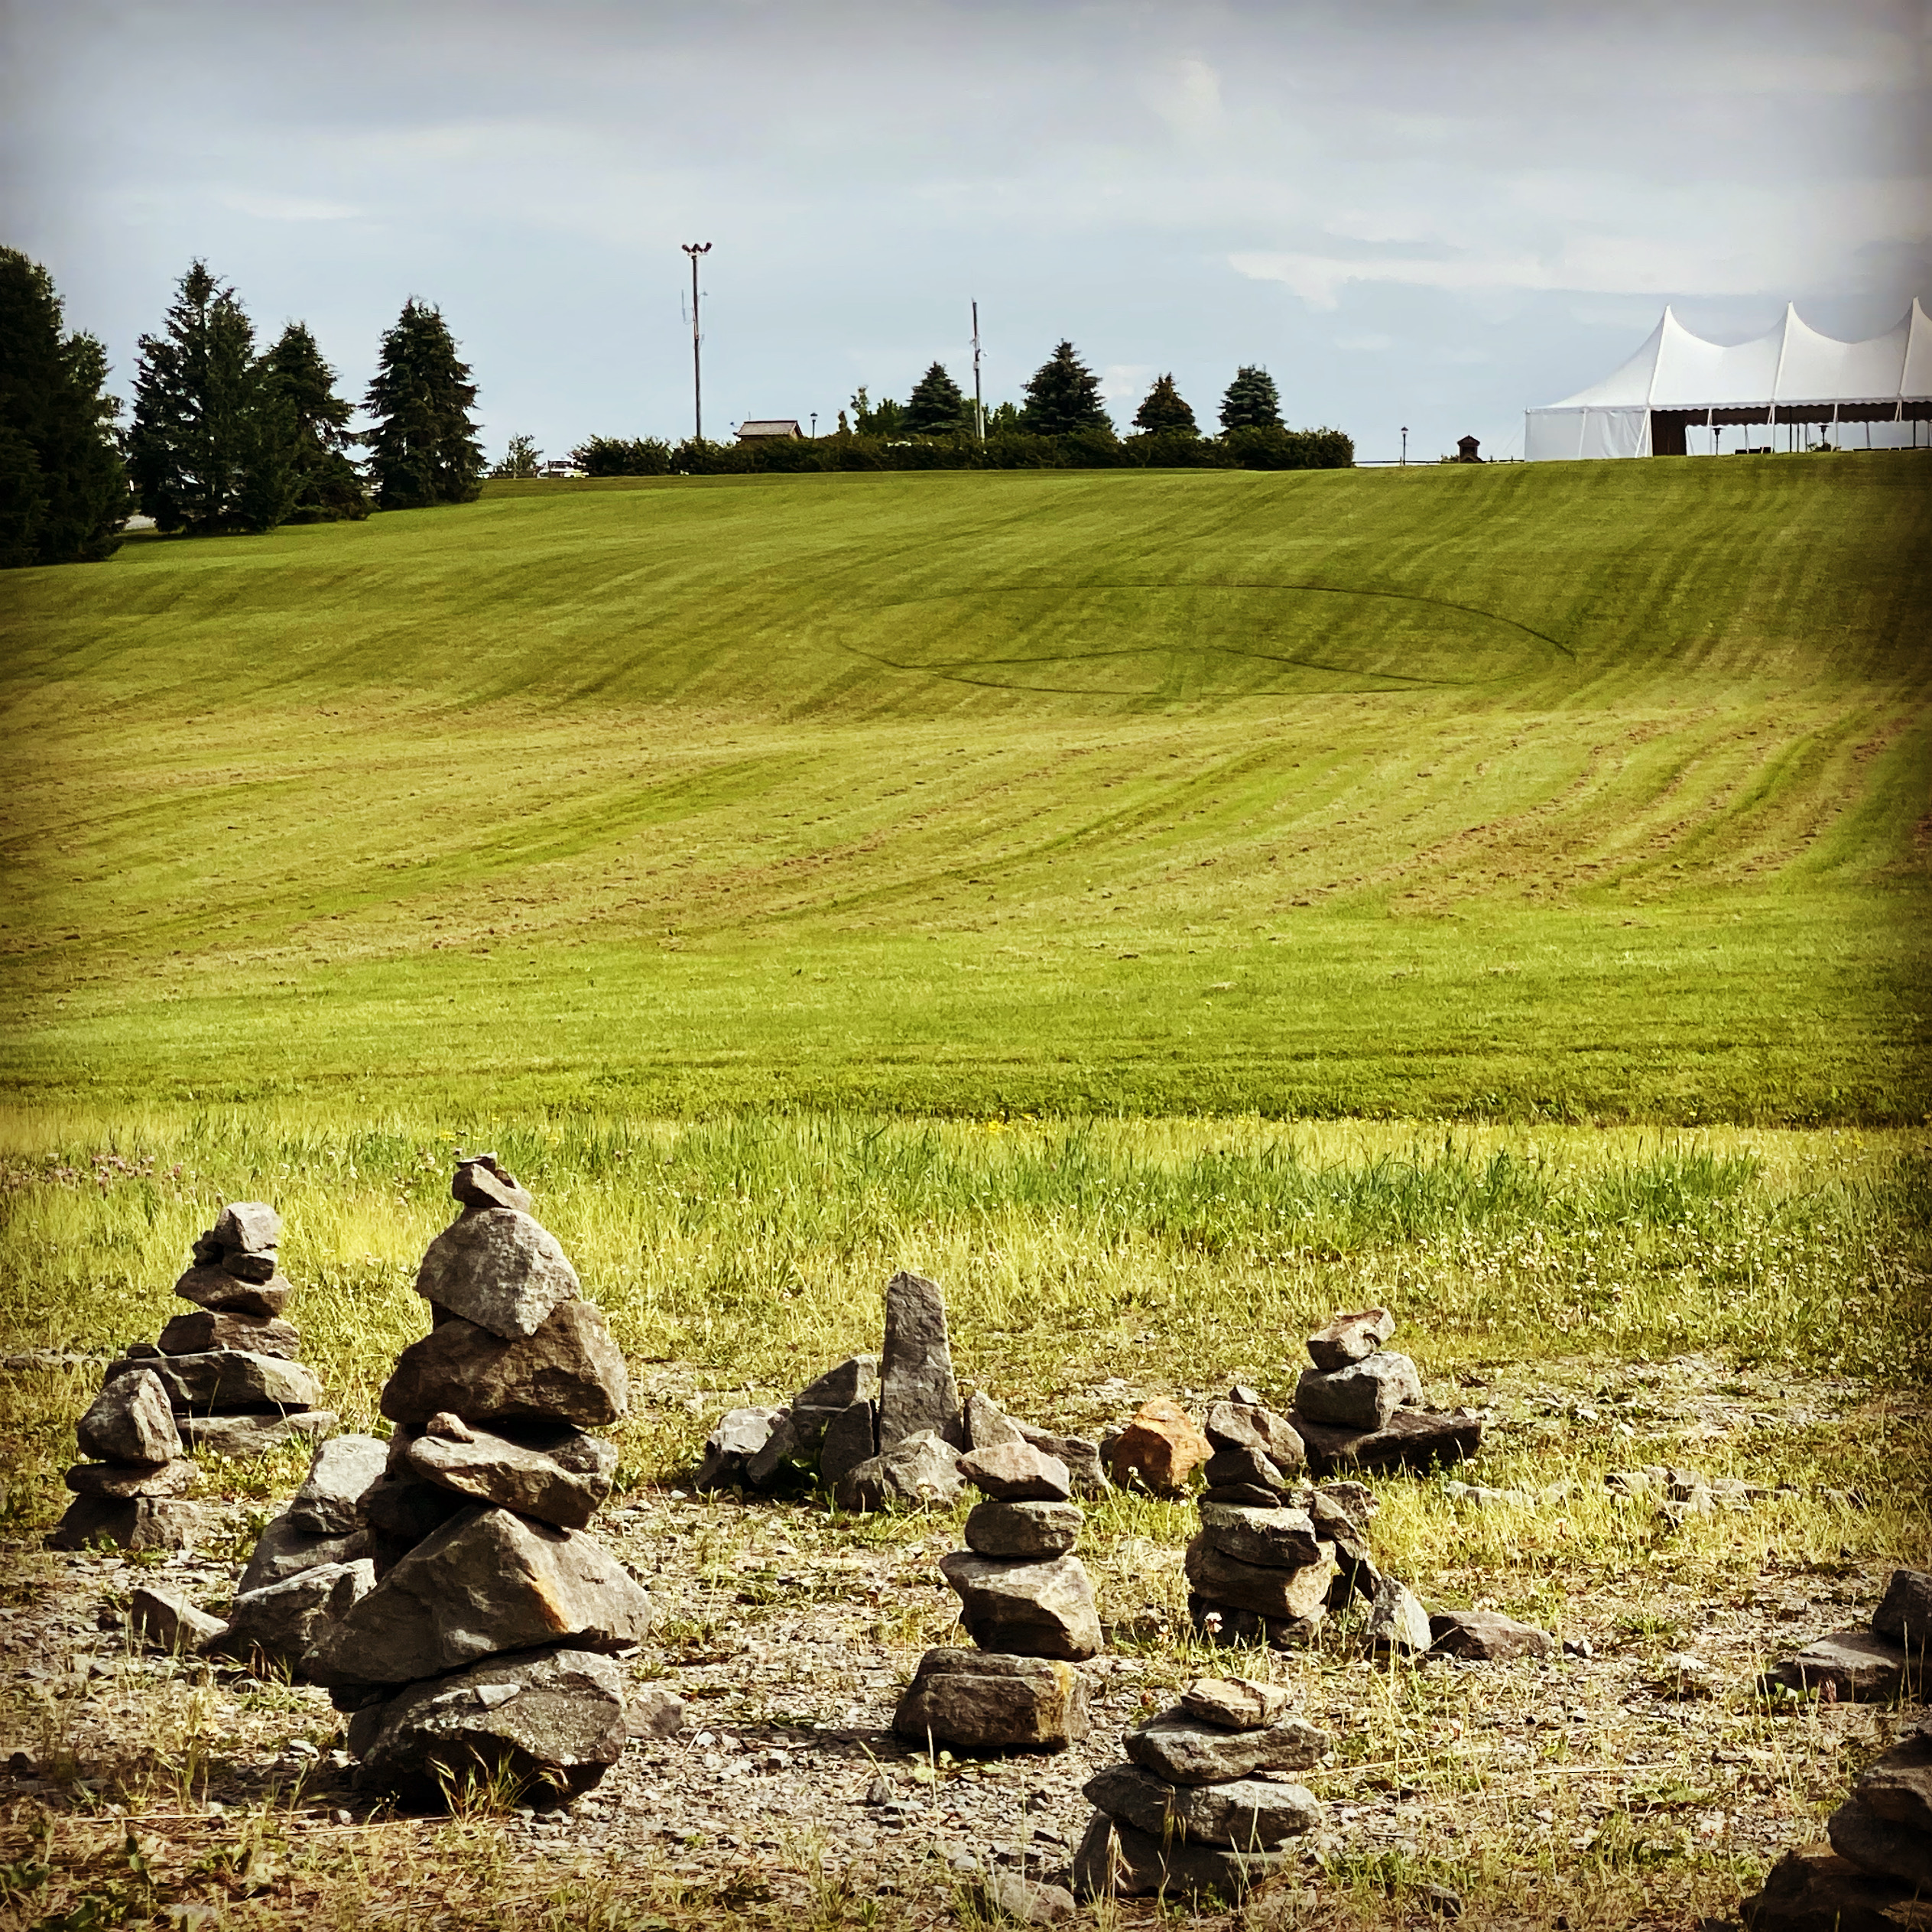 Rock cairns at the Woodstock stage site on the old Yasgur farm in Bethel, New York.  Note the peace sign mowed in the grass.